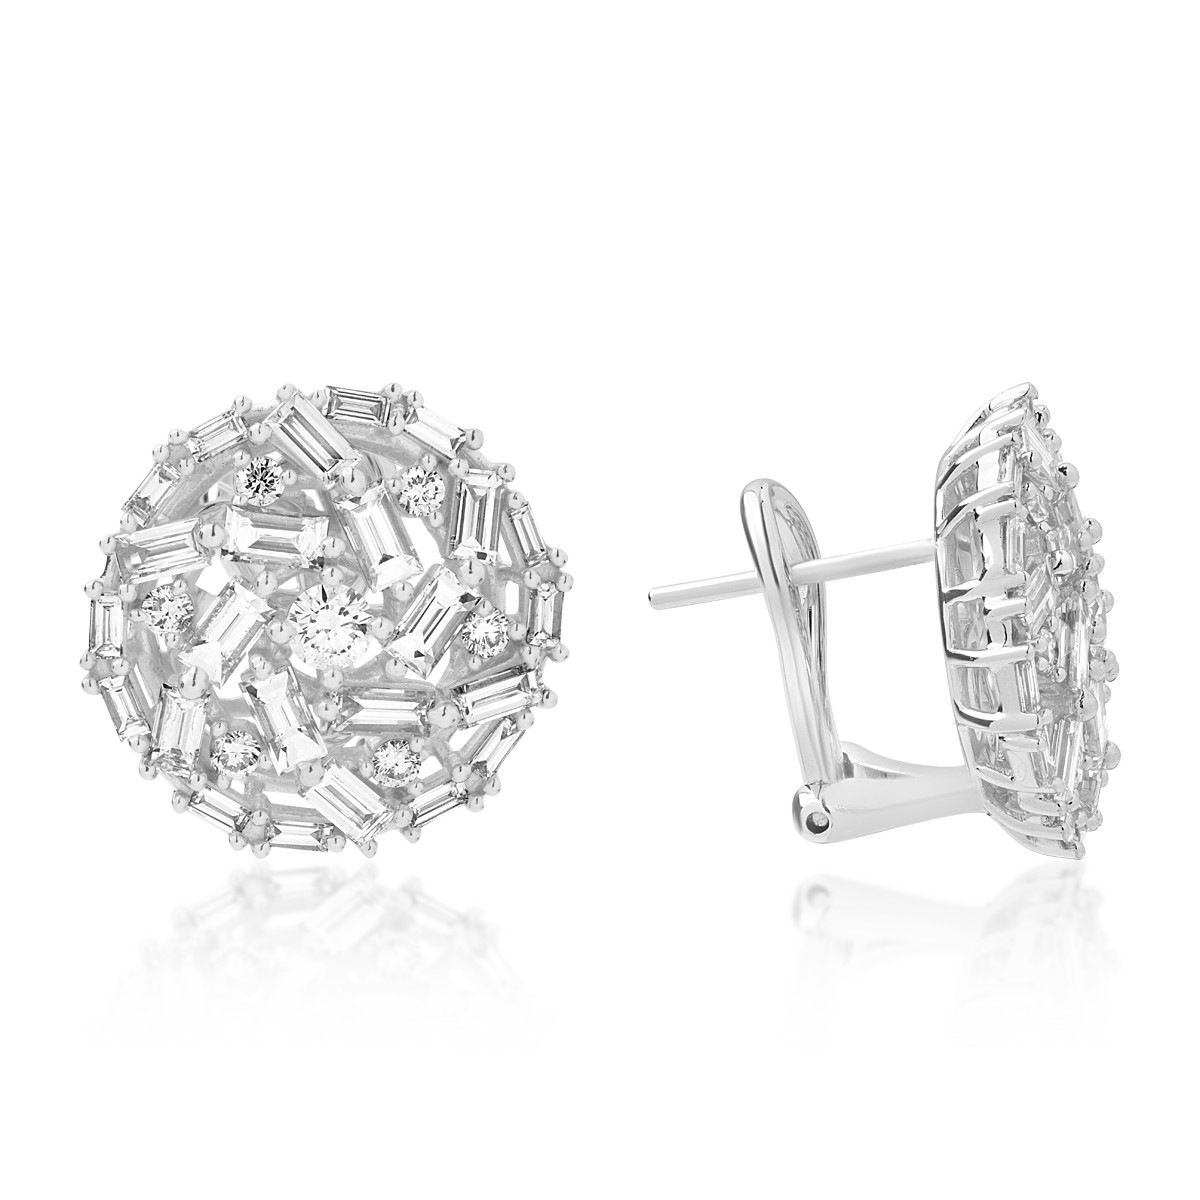 18K white gold earrings with 2.21ct diamonds